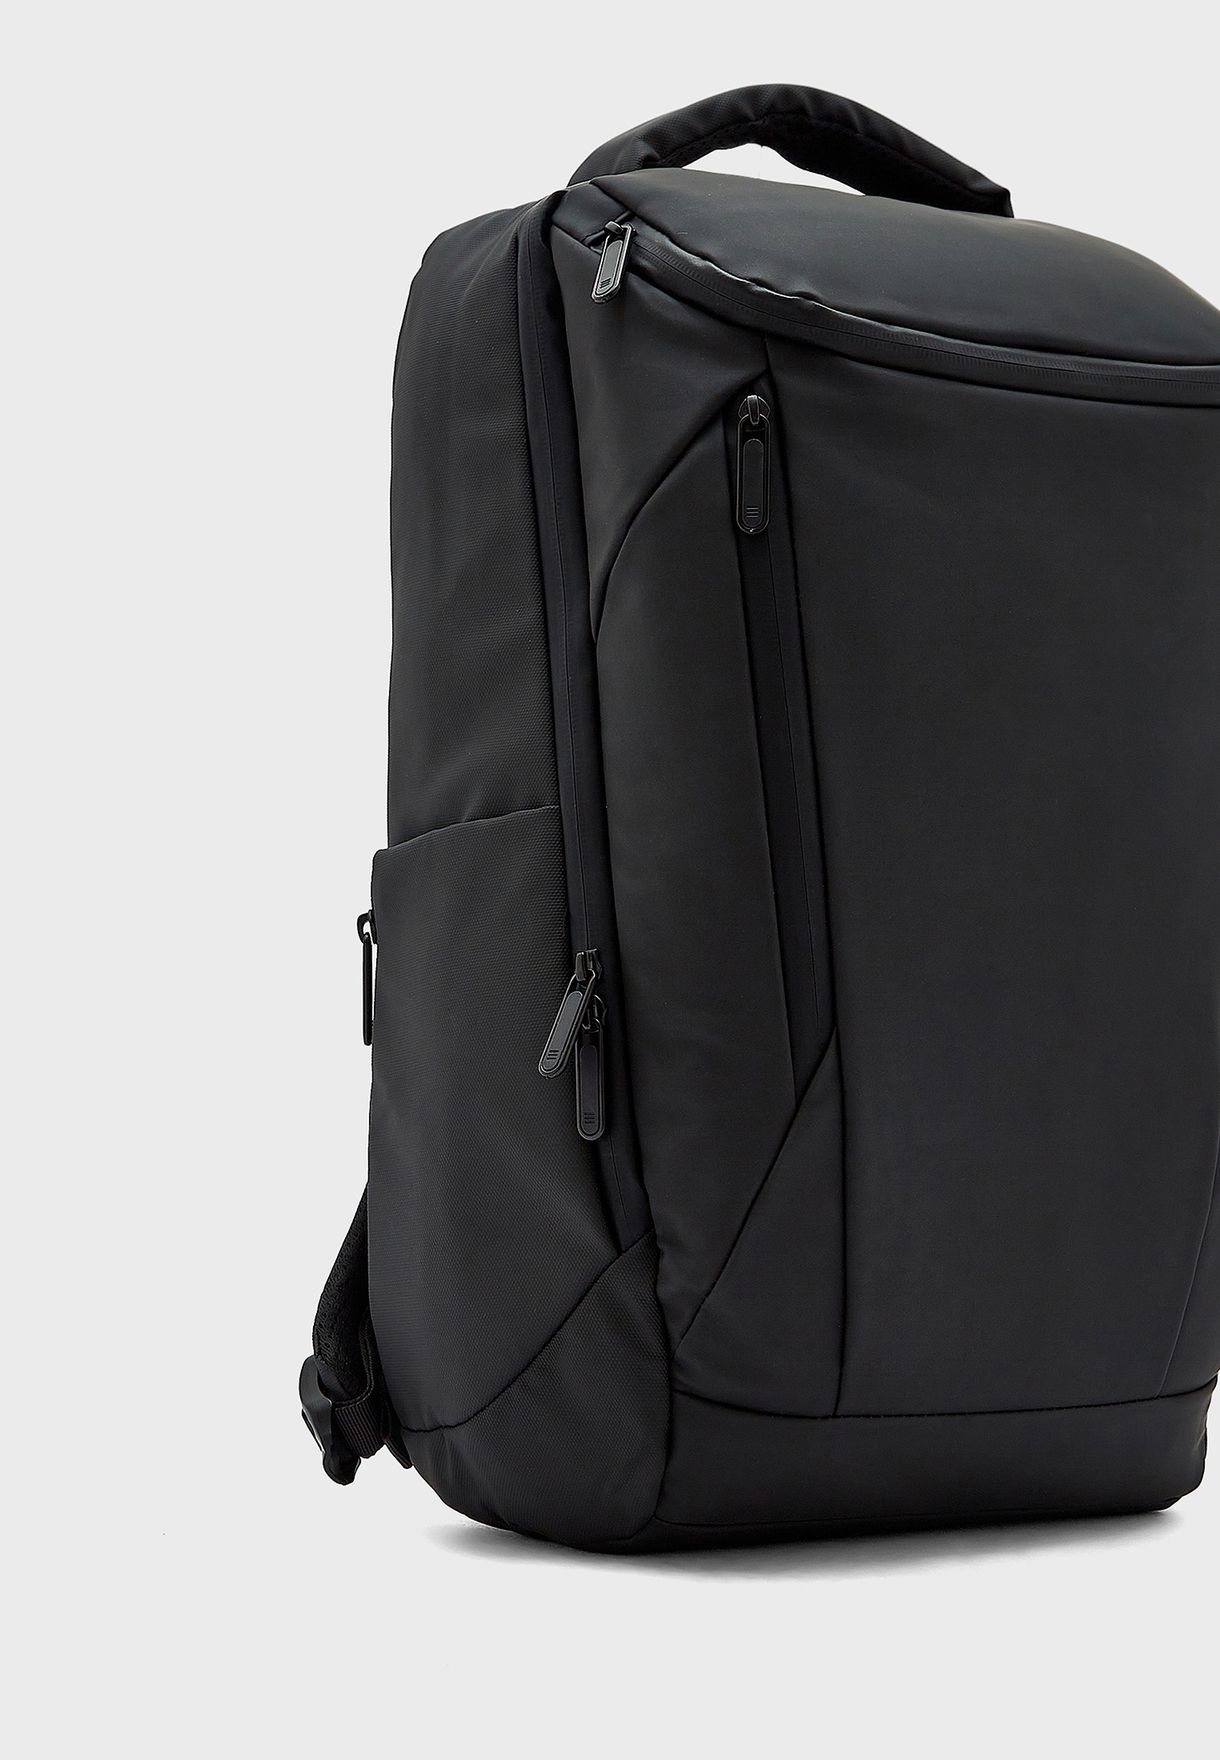 Premium Padded Multi Compartment Laptop Backpack